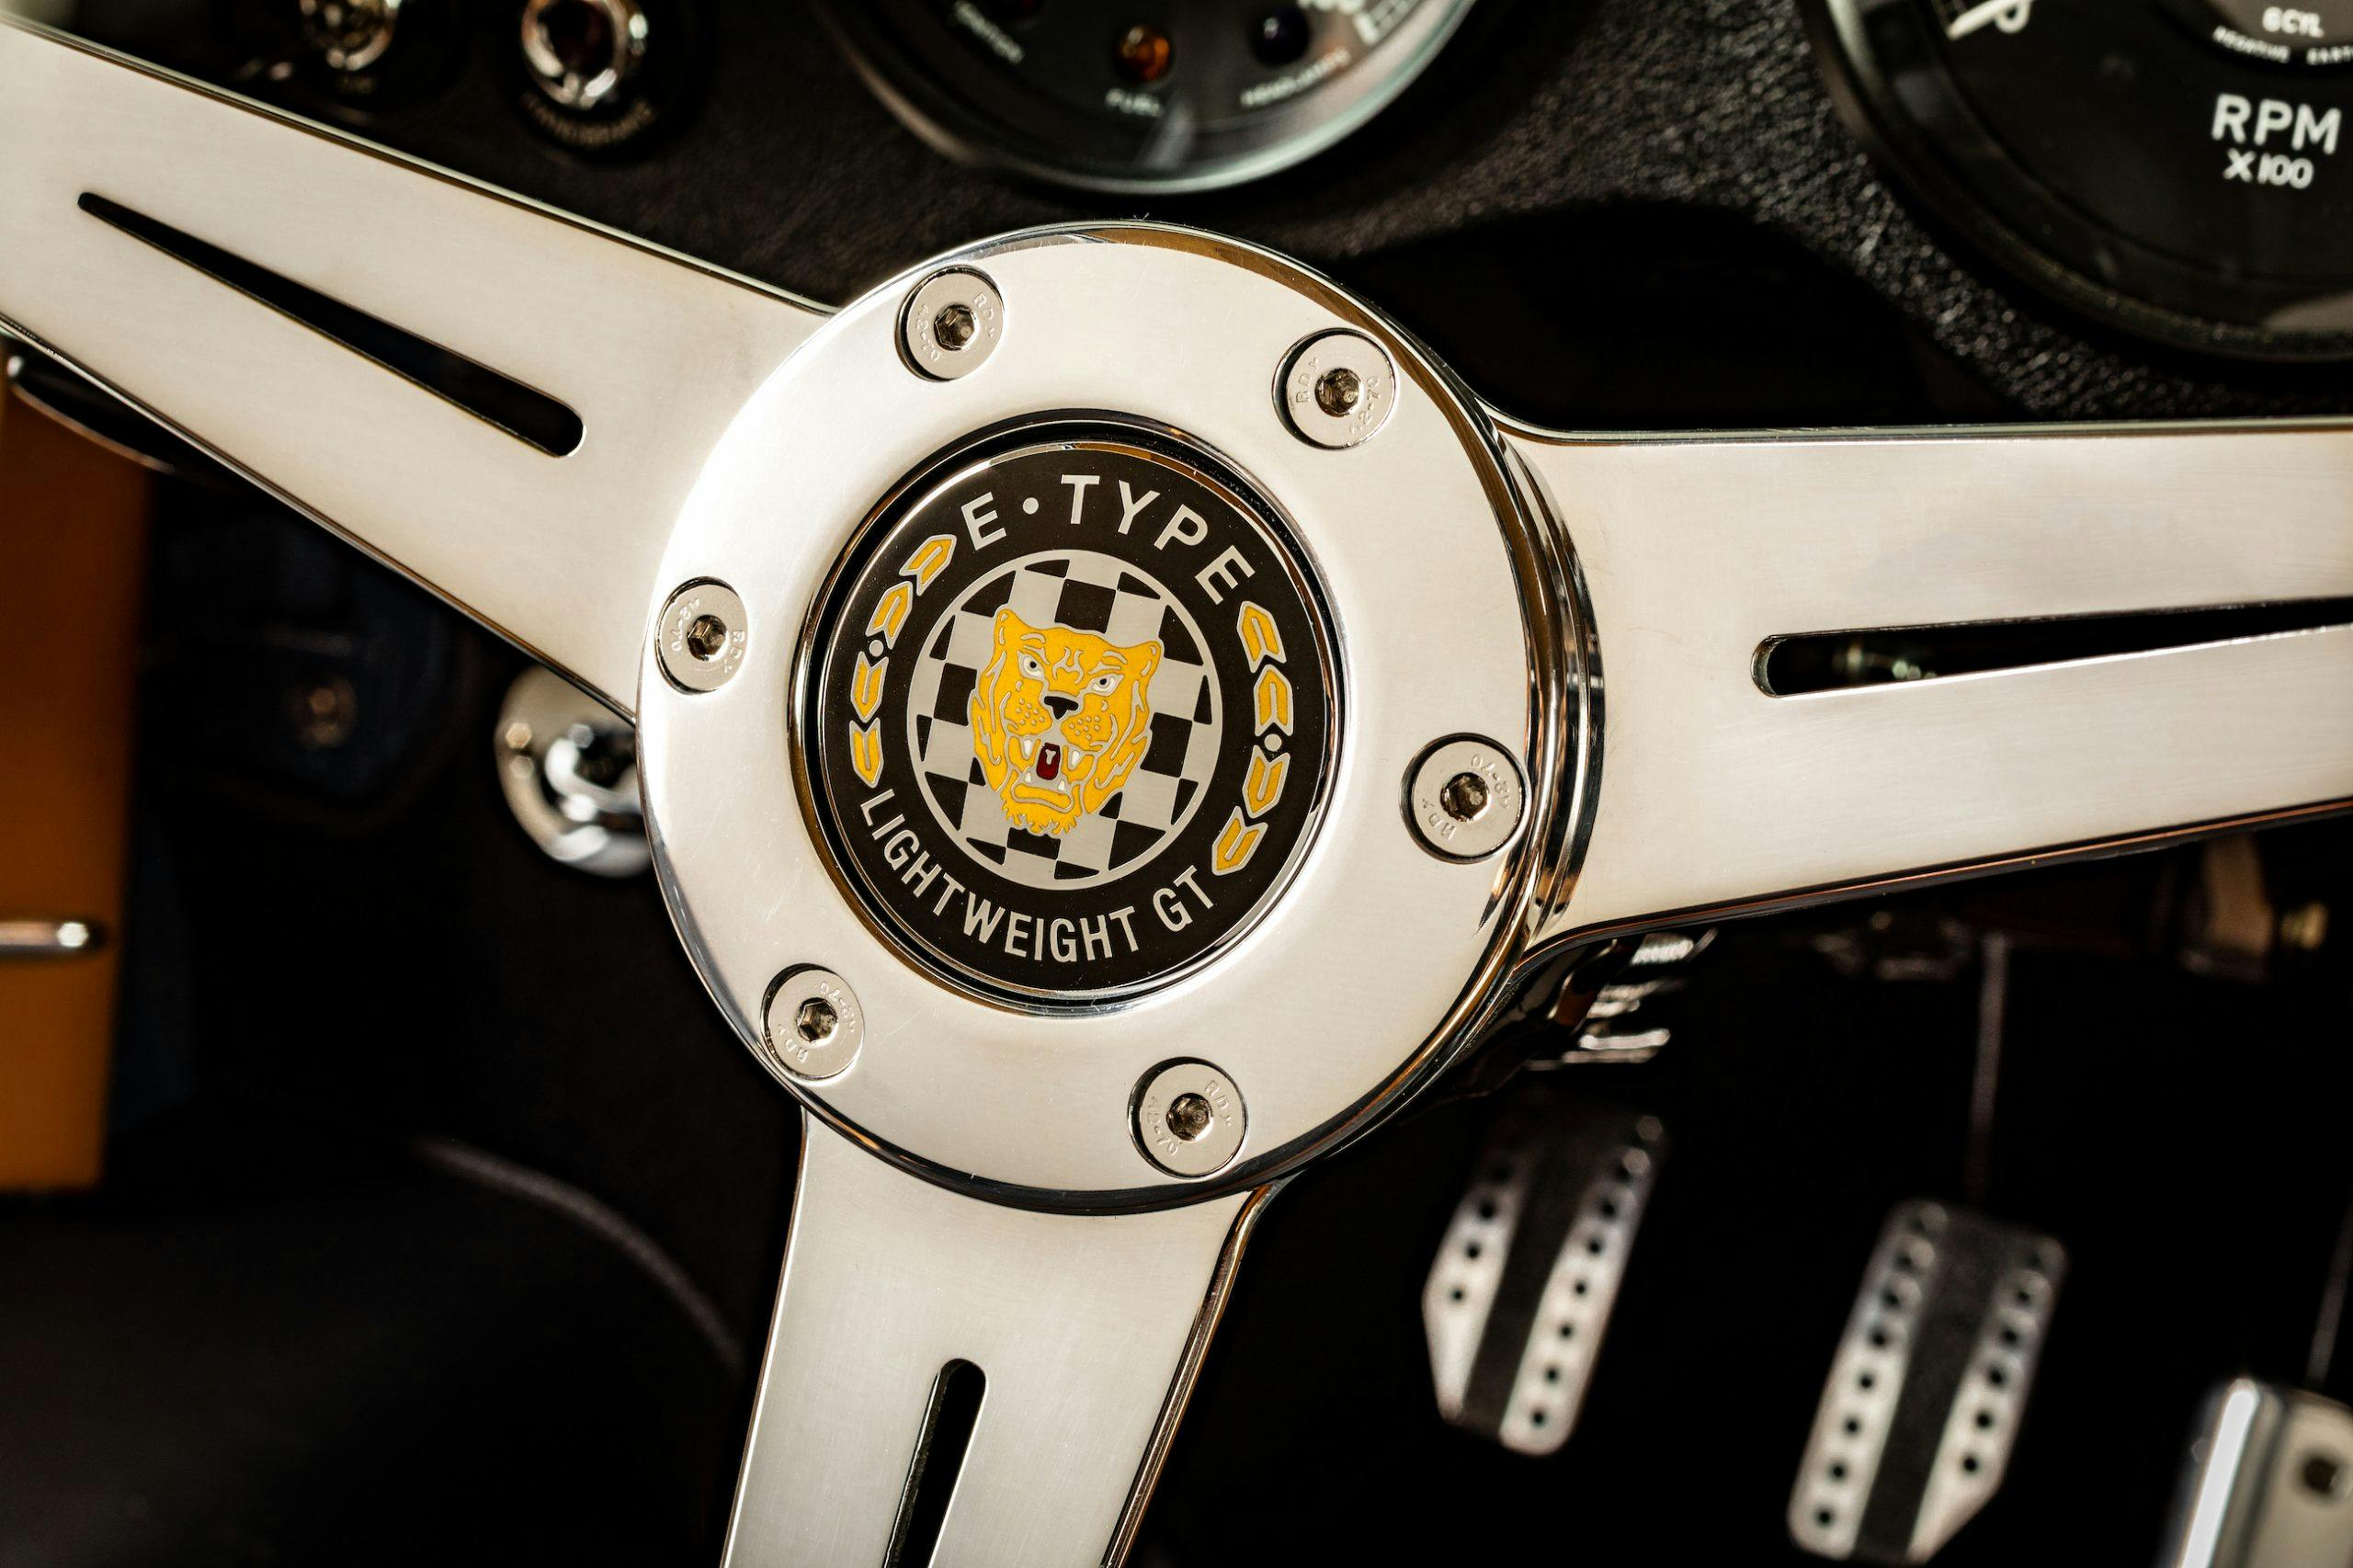 Eagle E-type Lightweight GT Steering Wheel Close Up